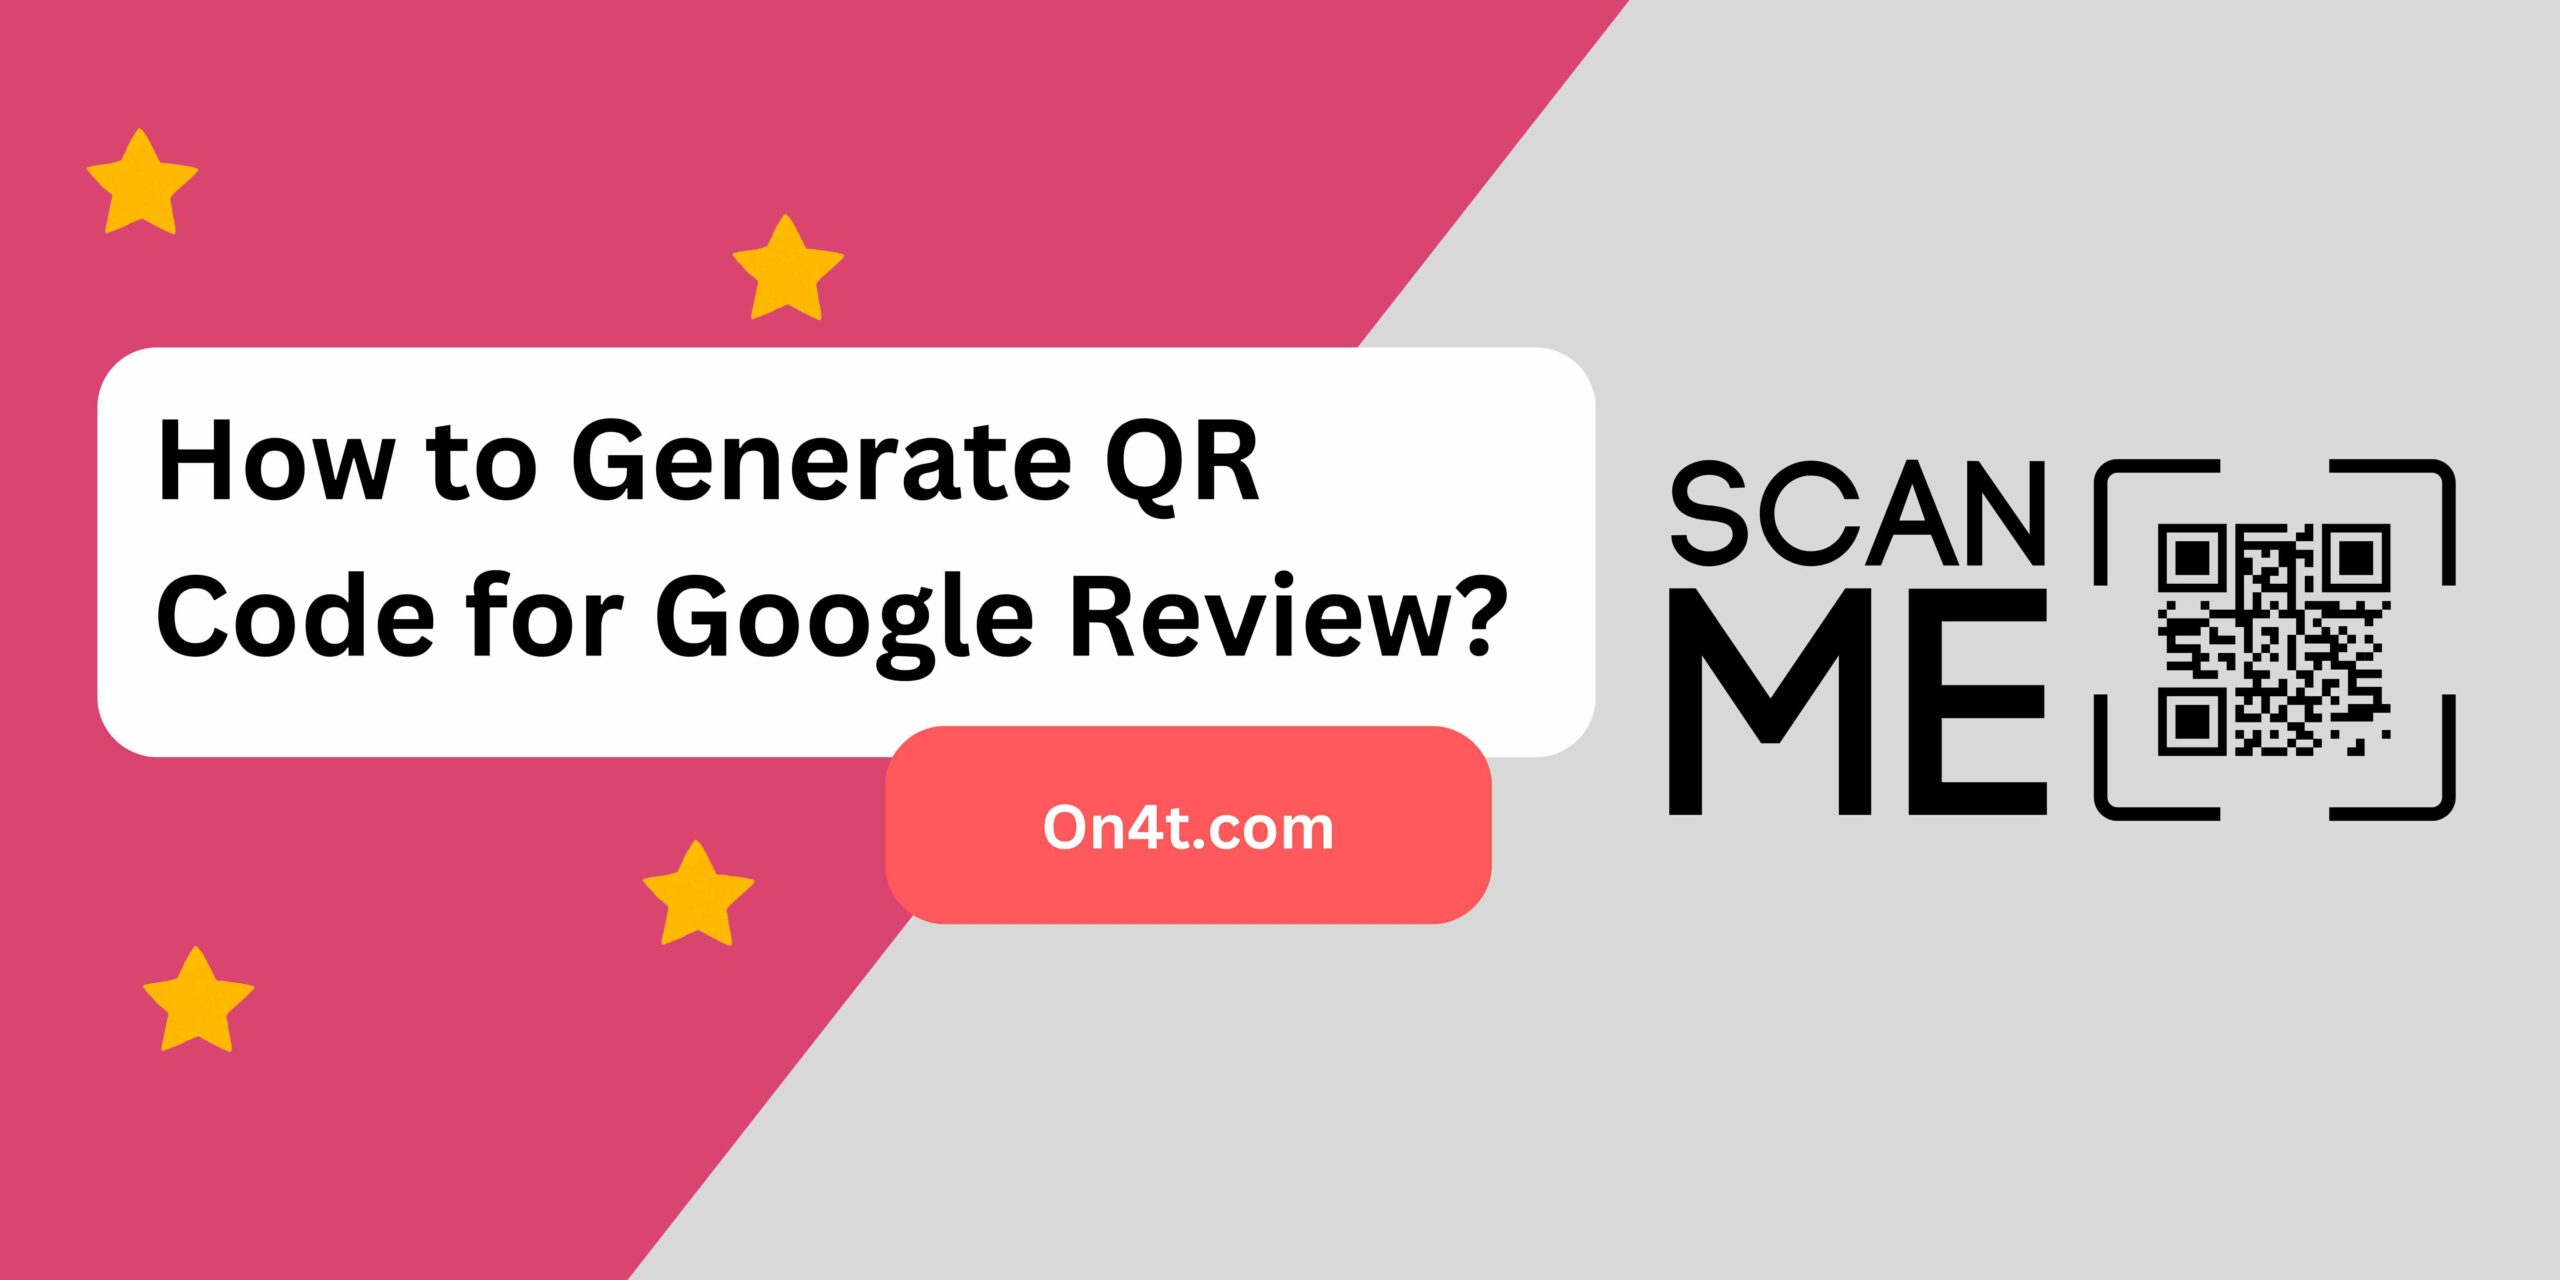 How to Generate QR Code for Google Review?